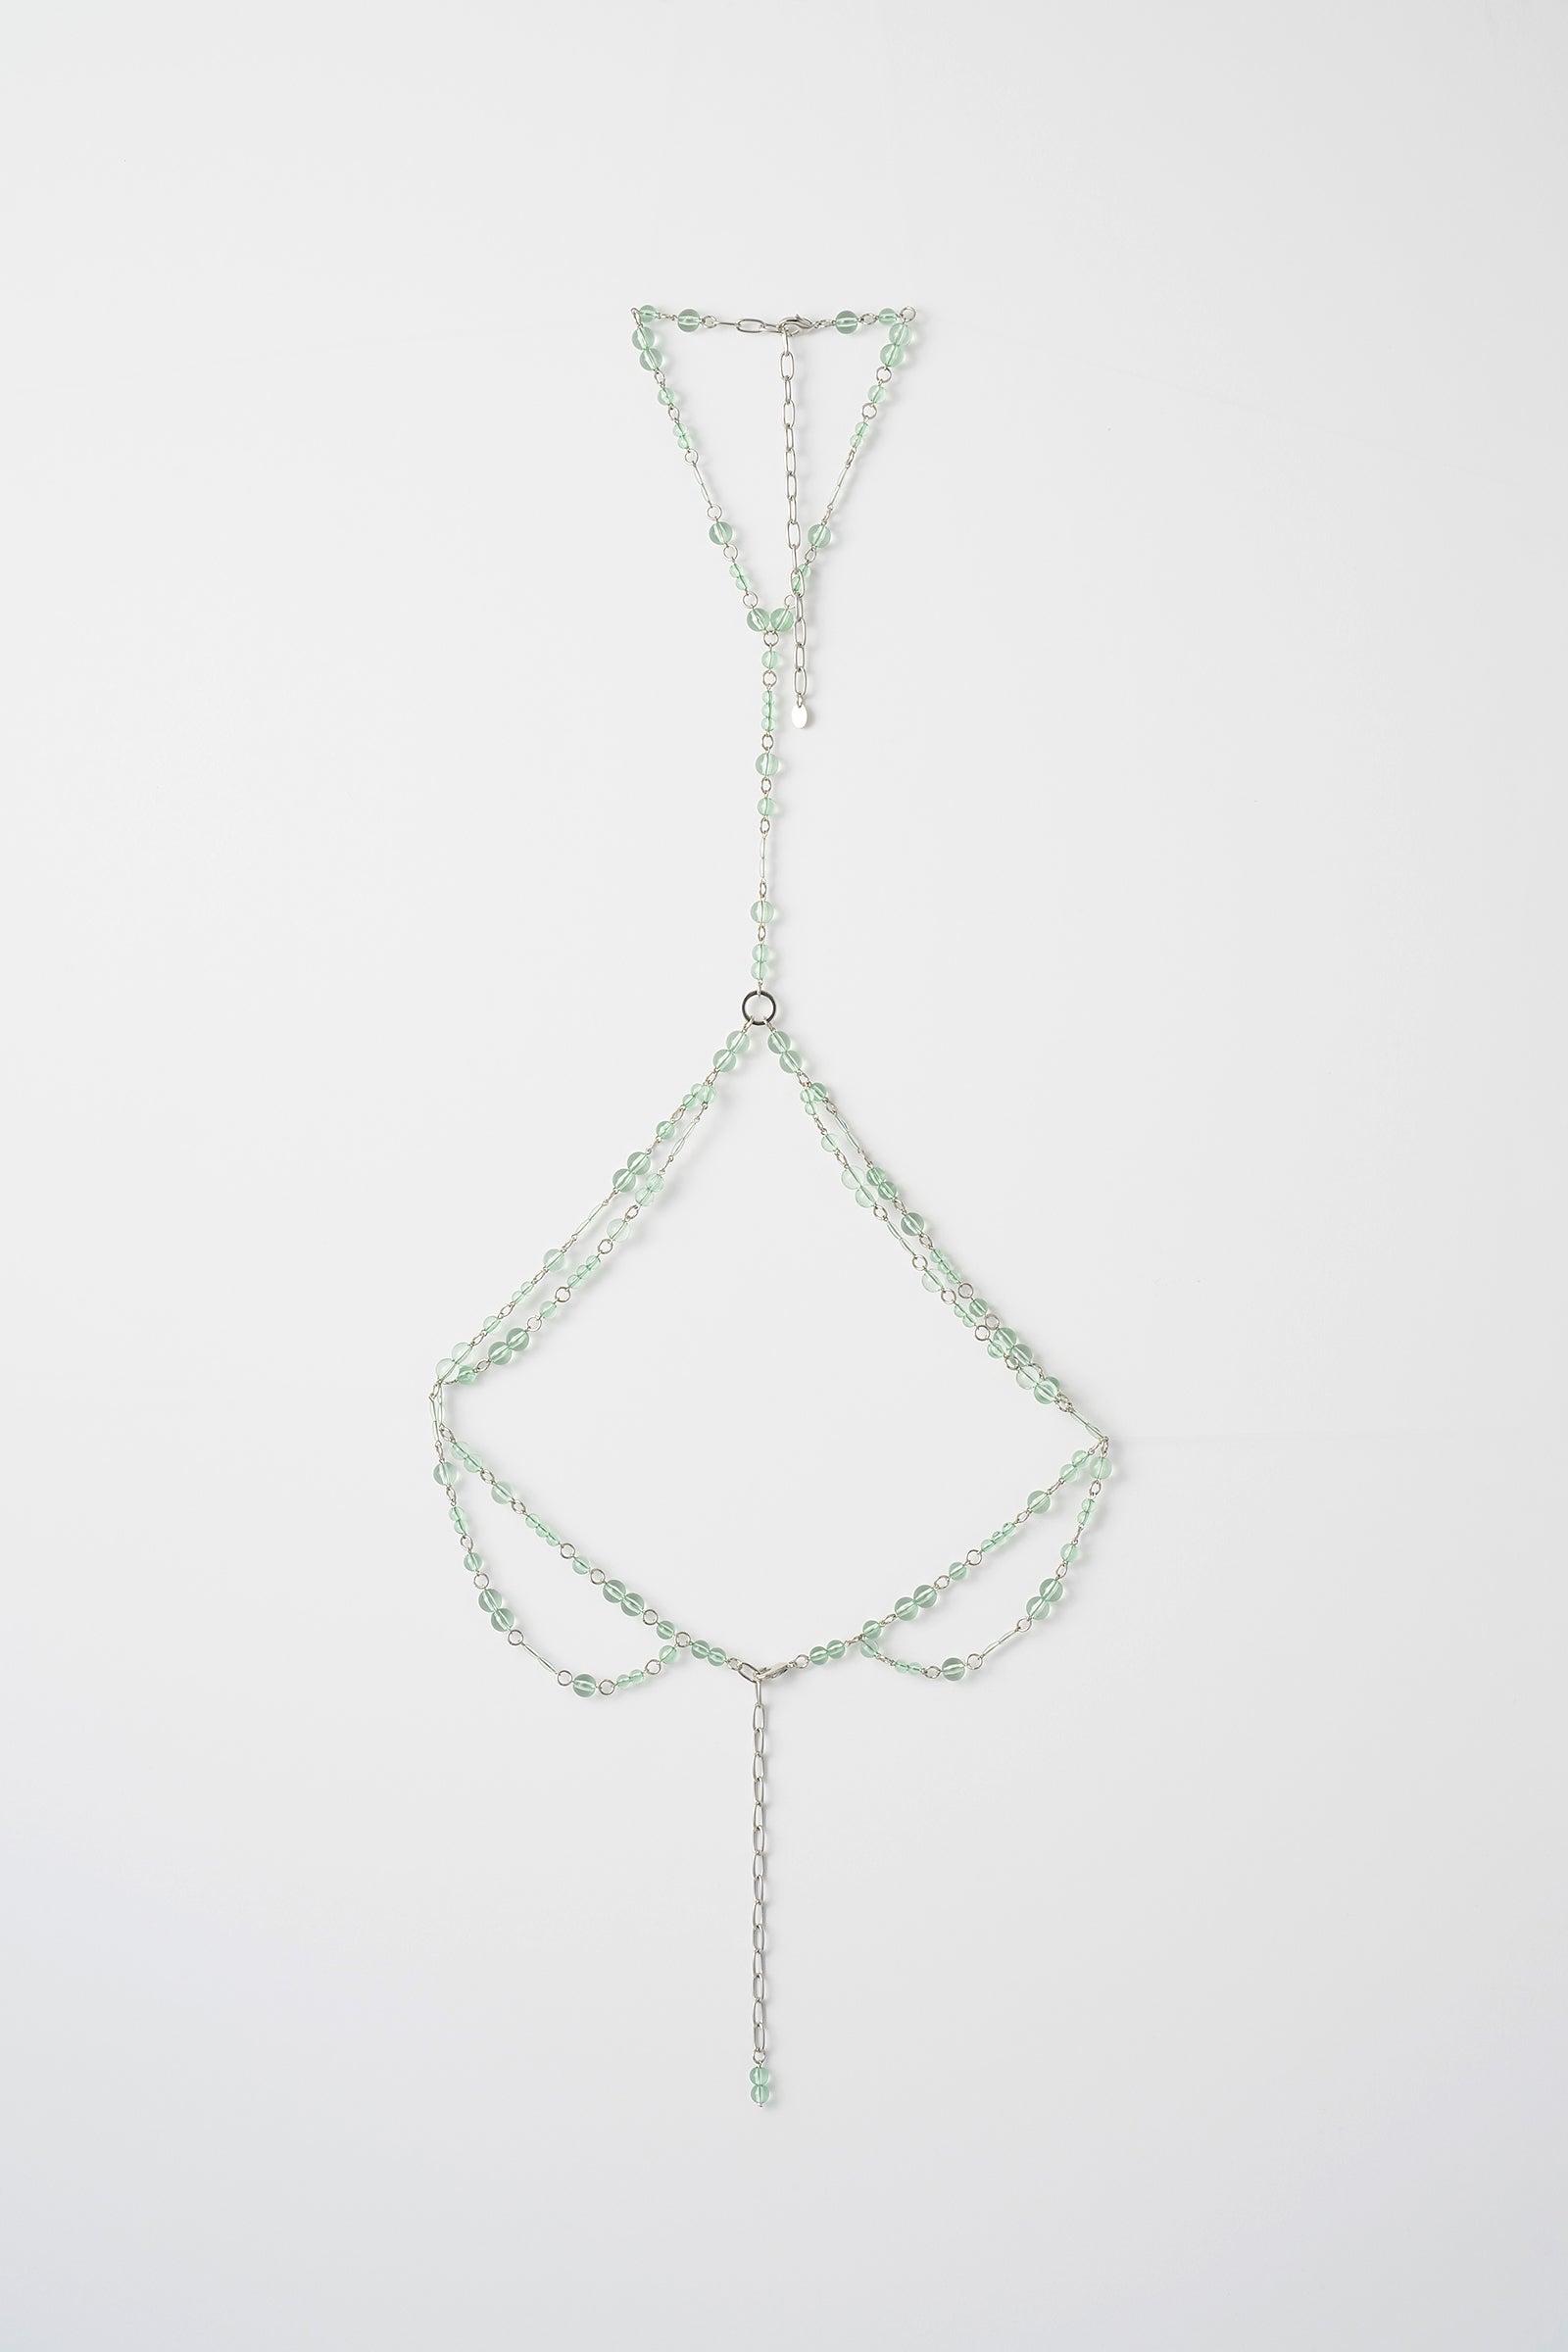 Dripping clear harness (Green)